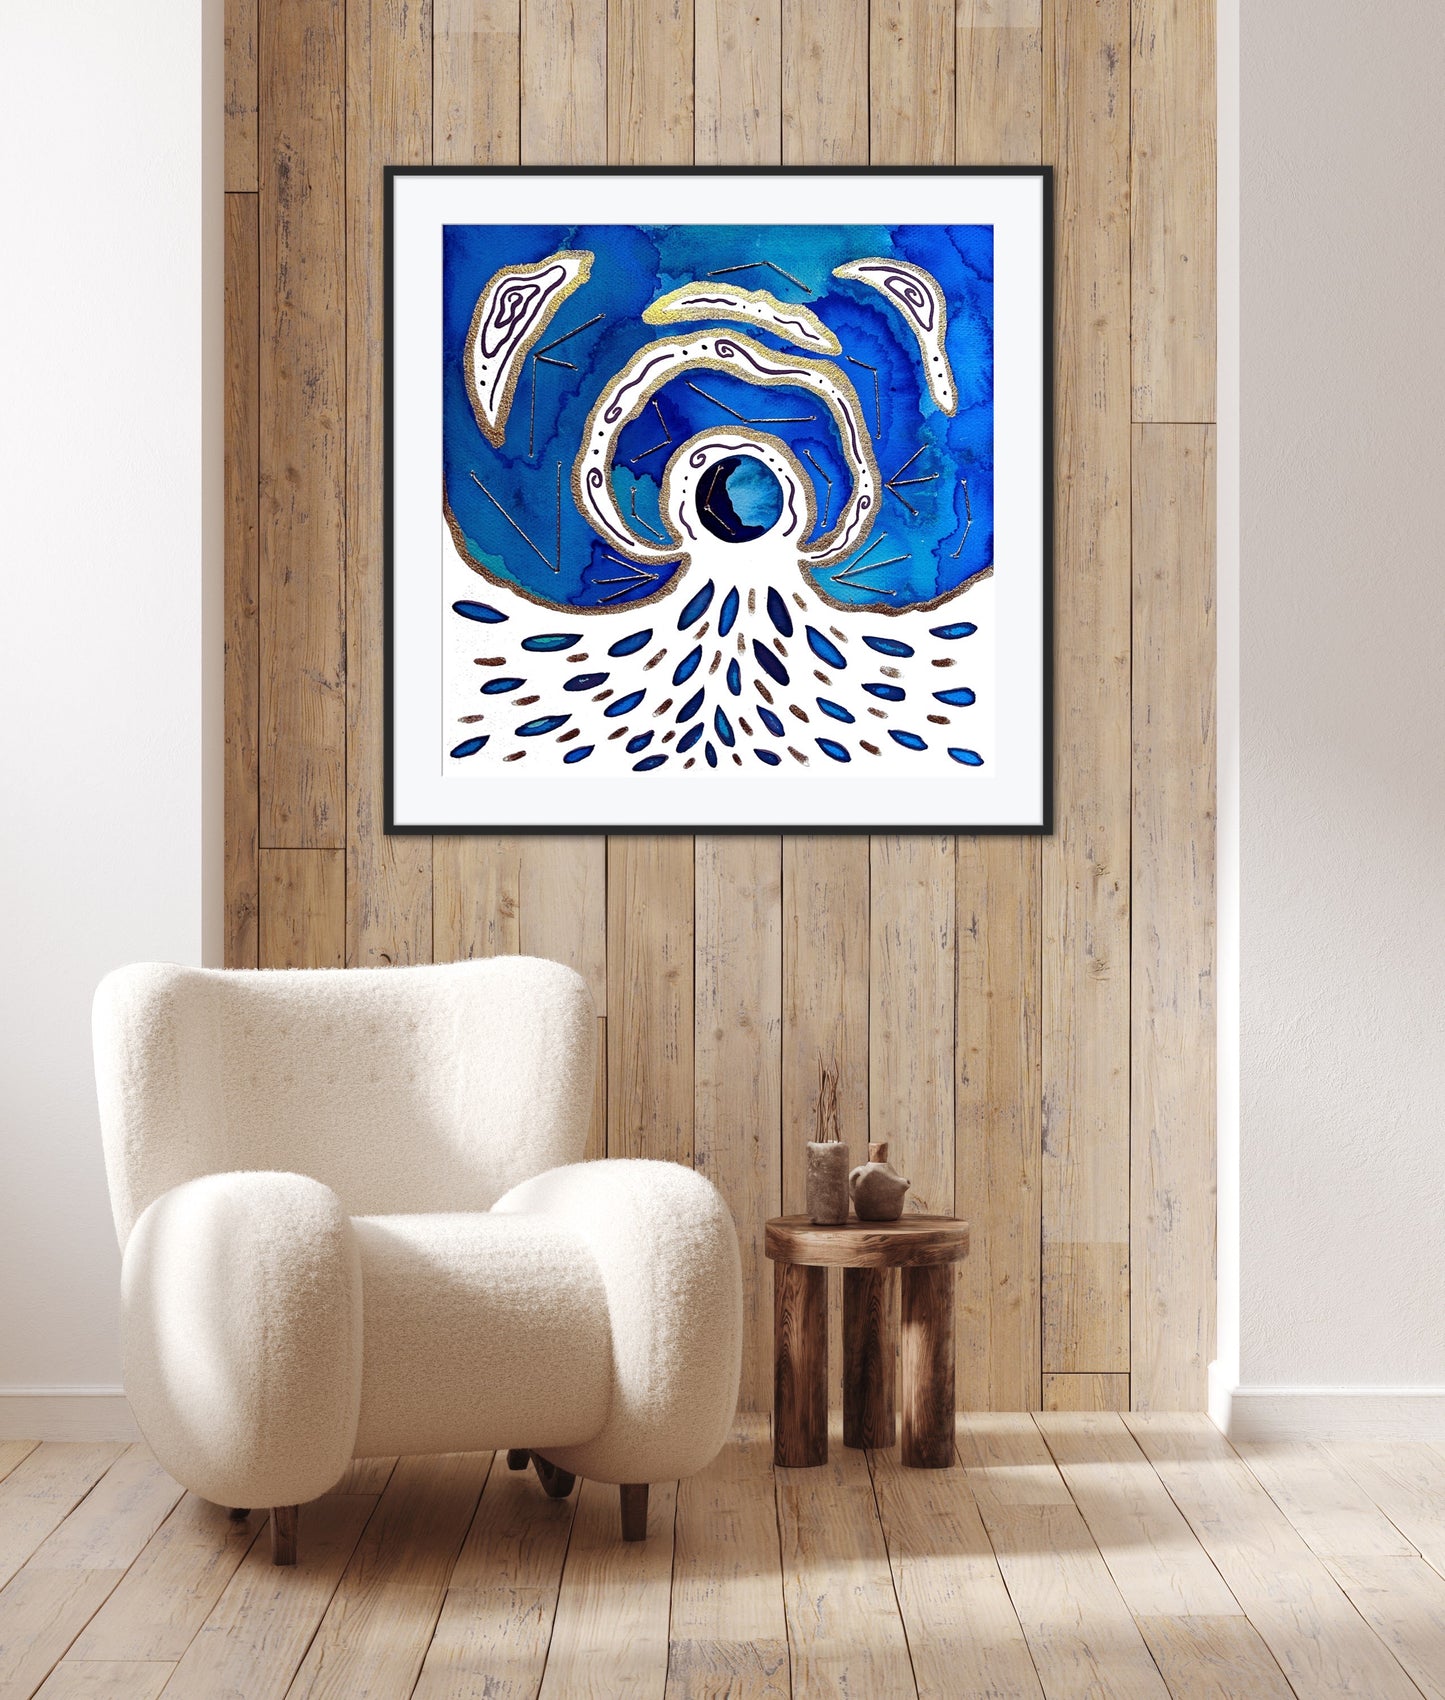 'Life Source' Embellished Art Print - Signed By the Artist - Limited Edition